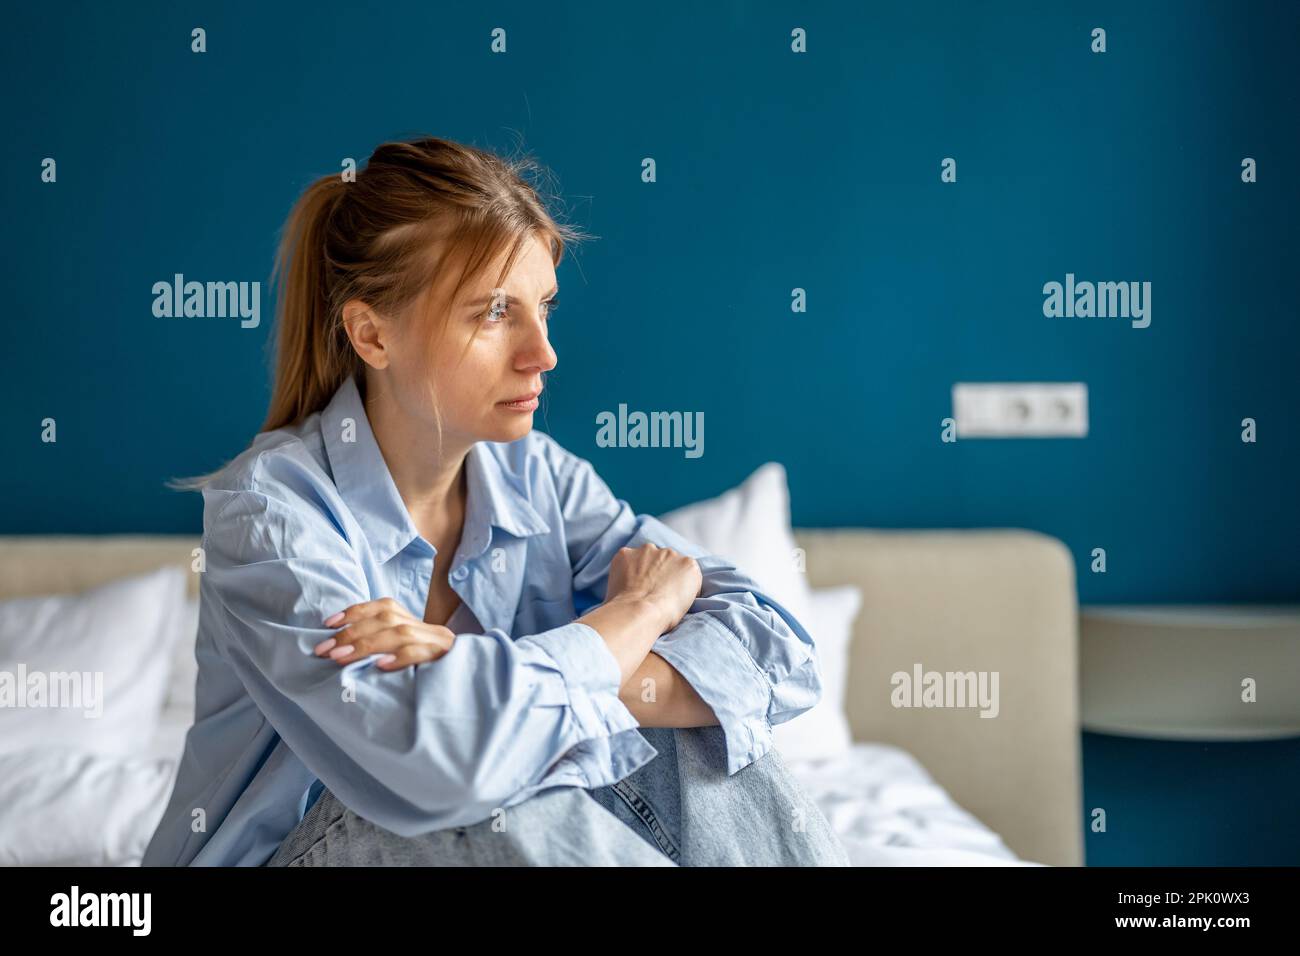 Woman exhausted by nervous stress looks devastated sits on bed with arms crossed feels hopelessness Stock Photo